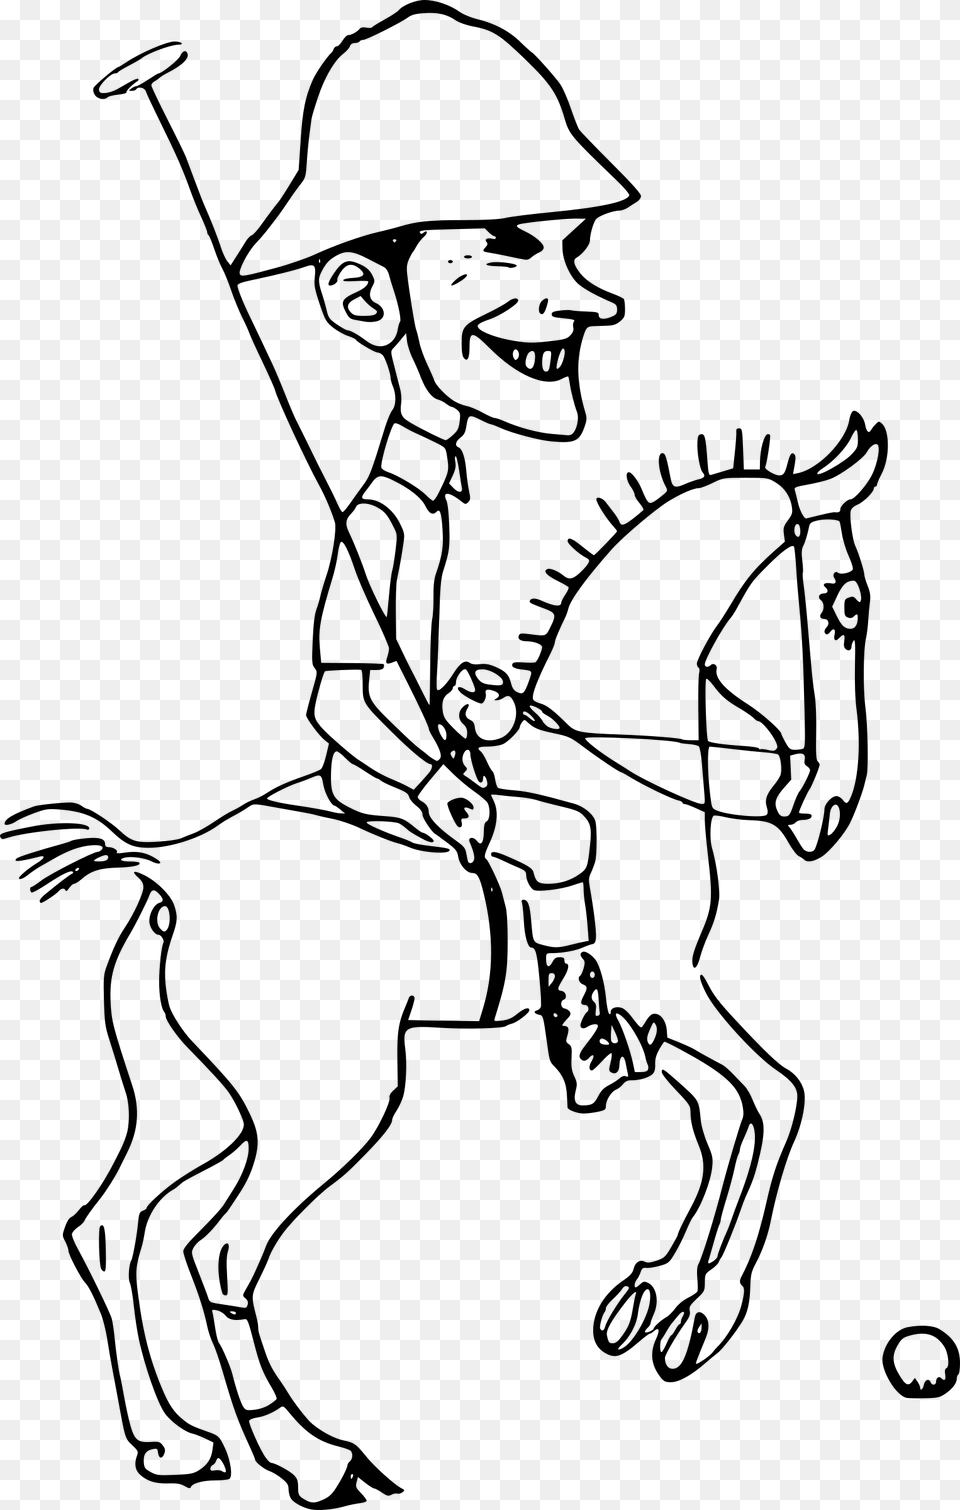 Playing Polo Clip Arts Polo Horse Clip Art Black And White, Gray Free Transparent Png